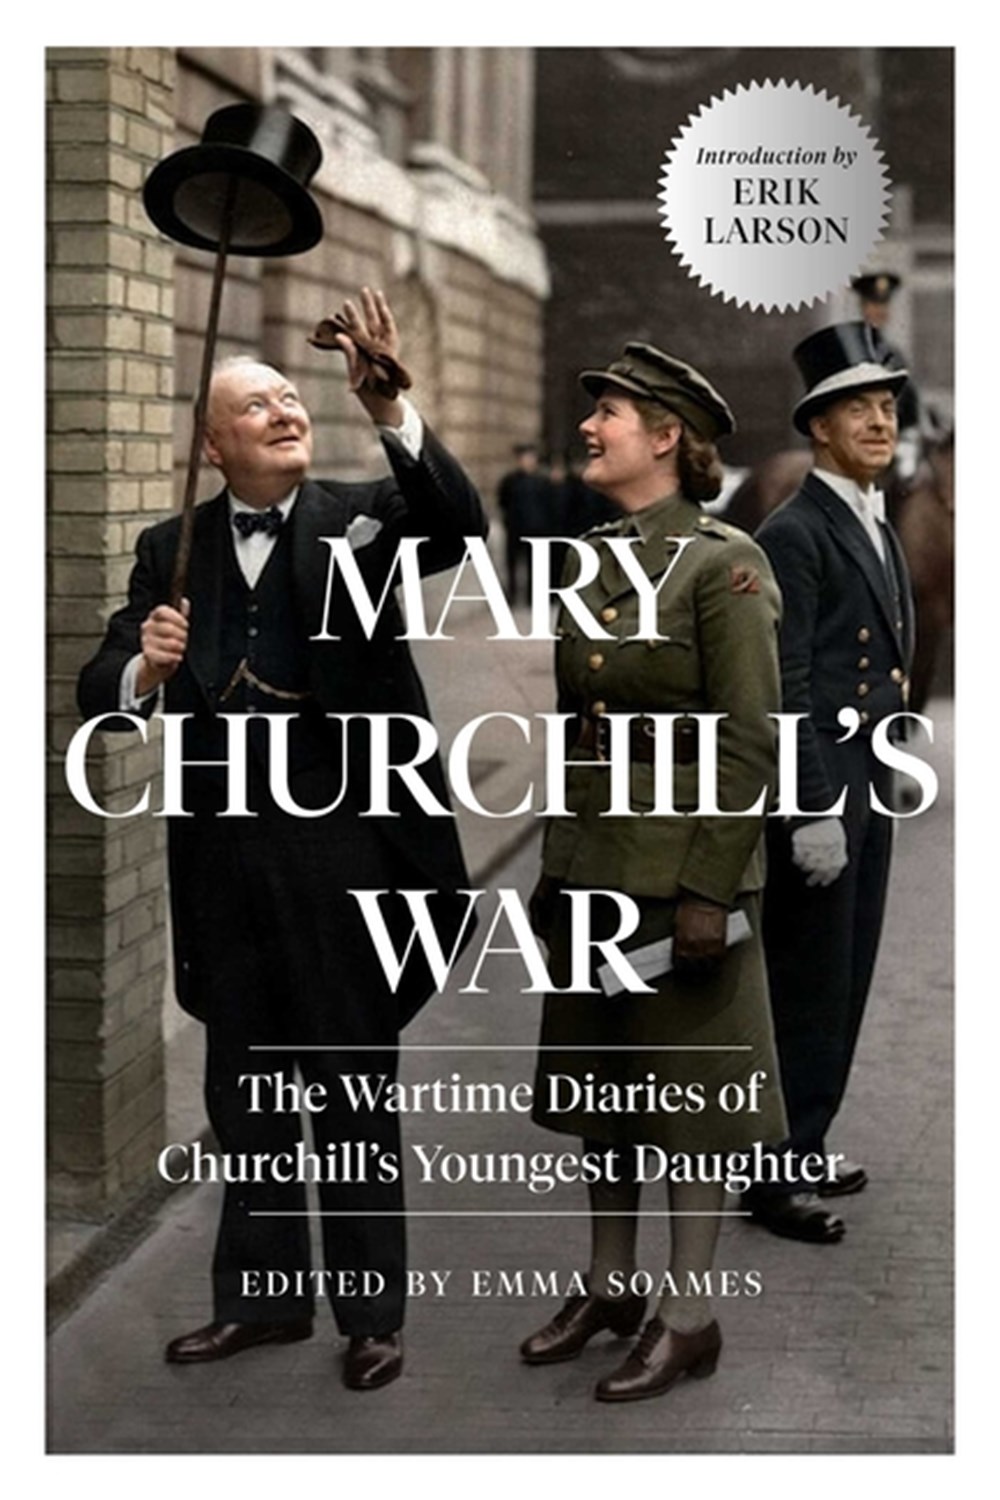 Mary Churchill's War The Wartime Diaries of Churchill's Youngest Daughter